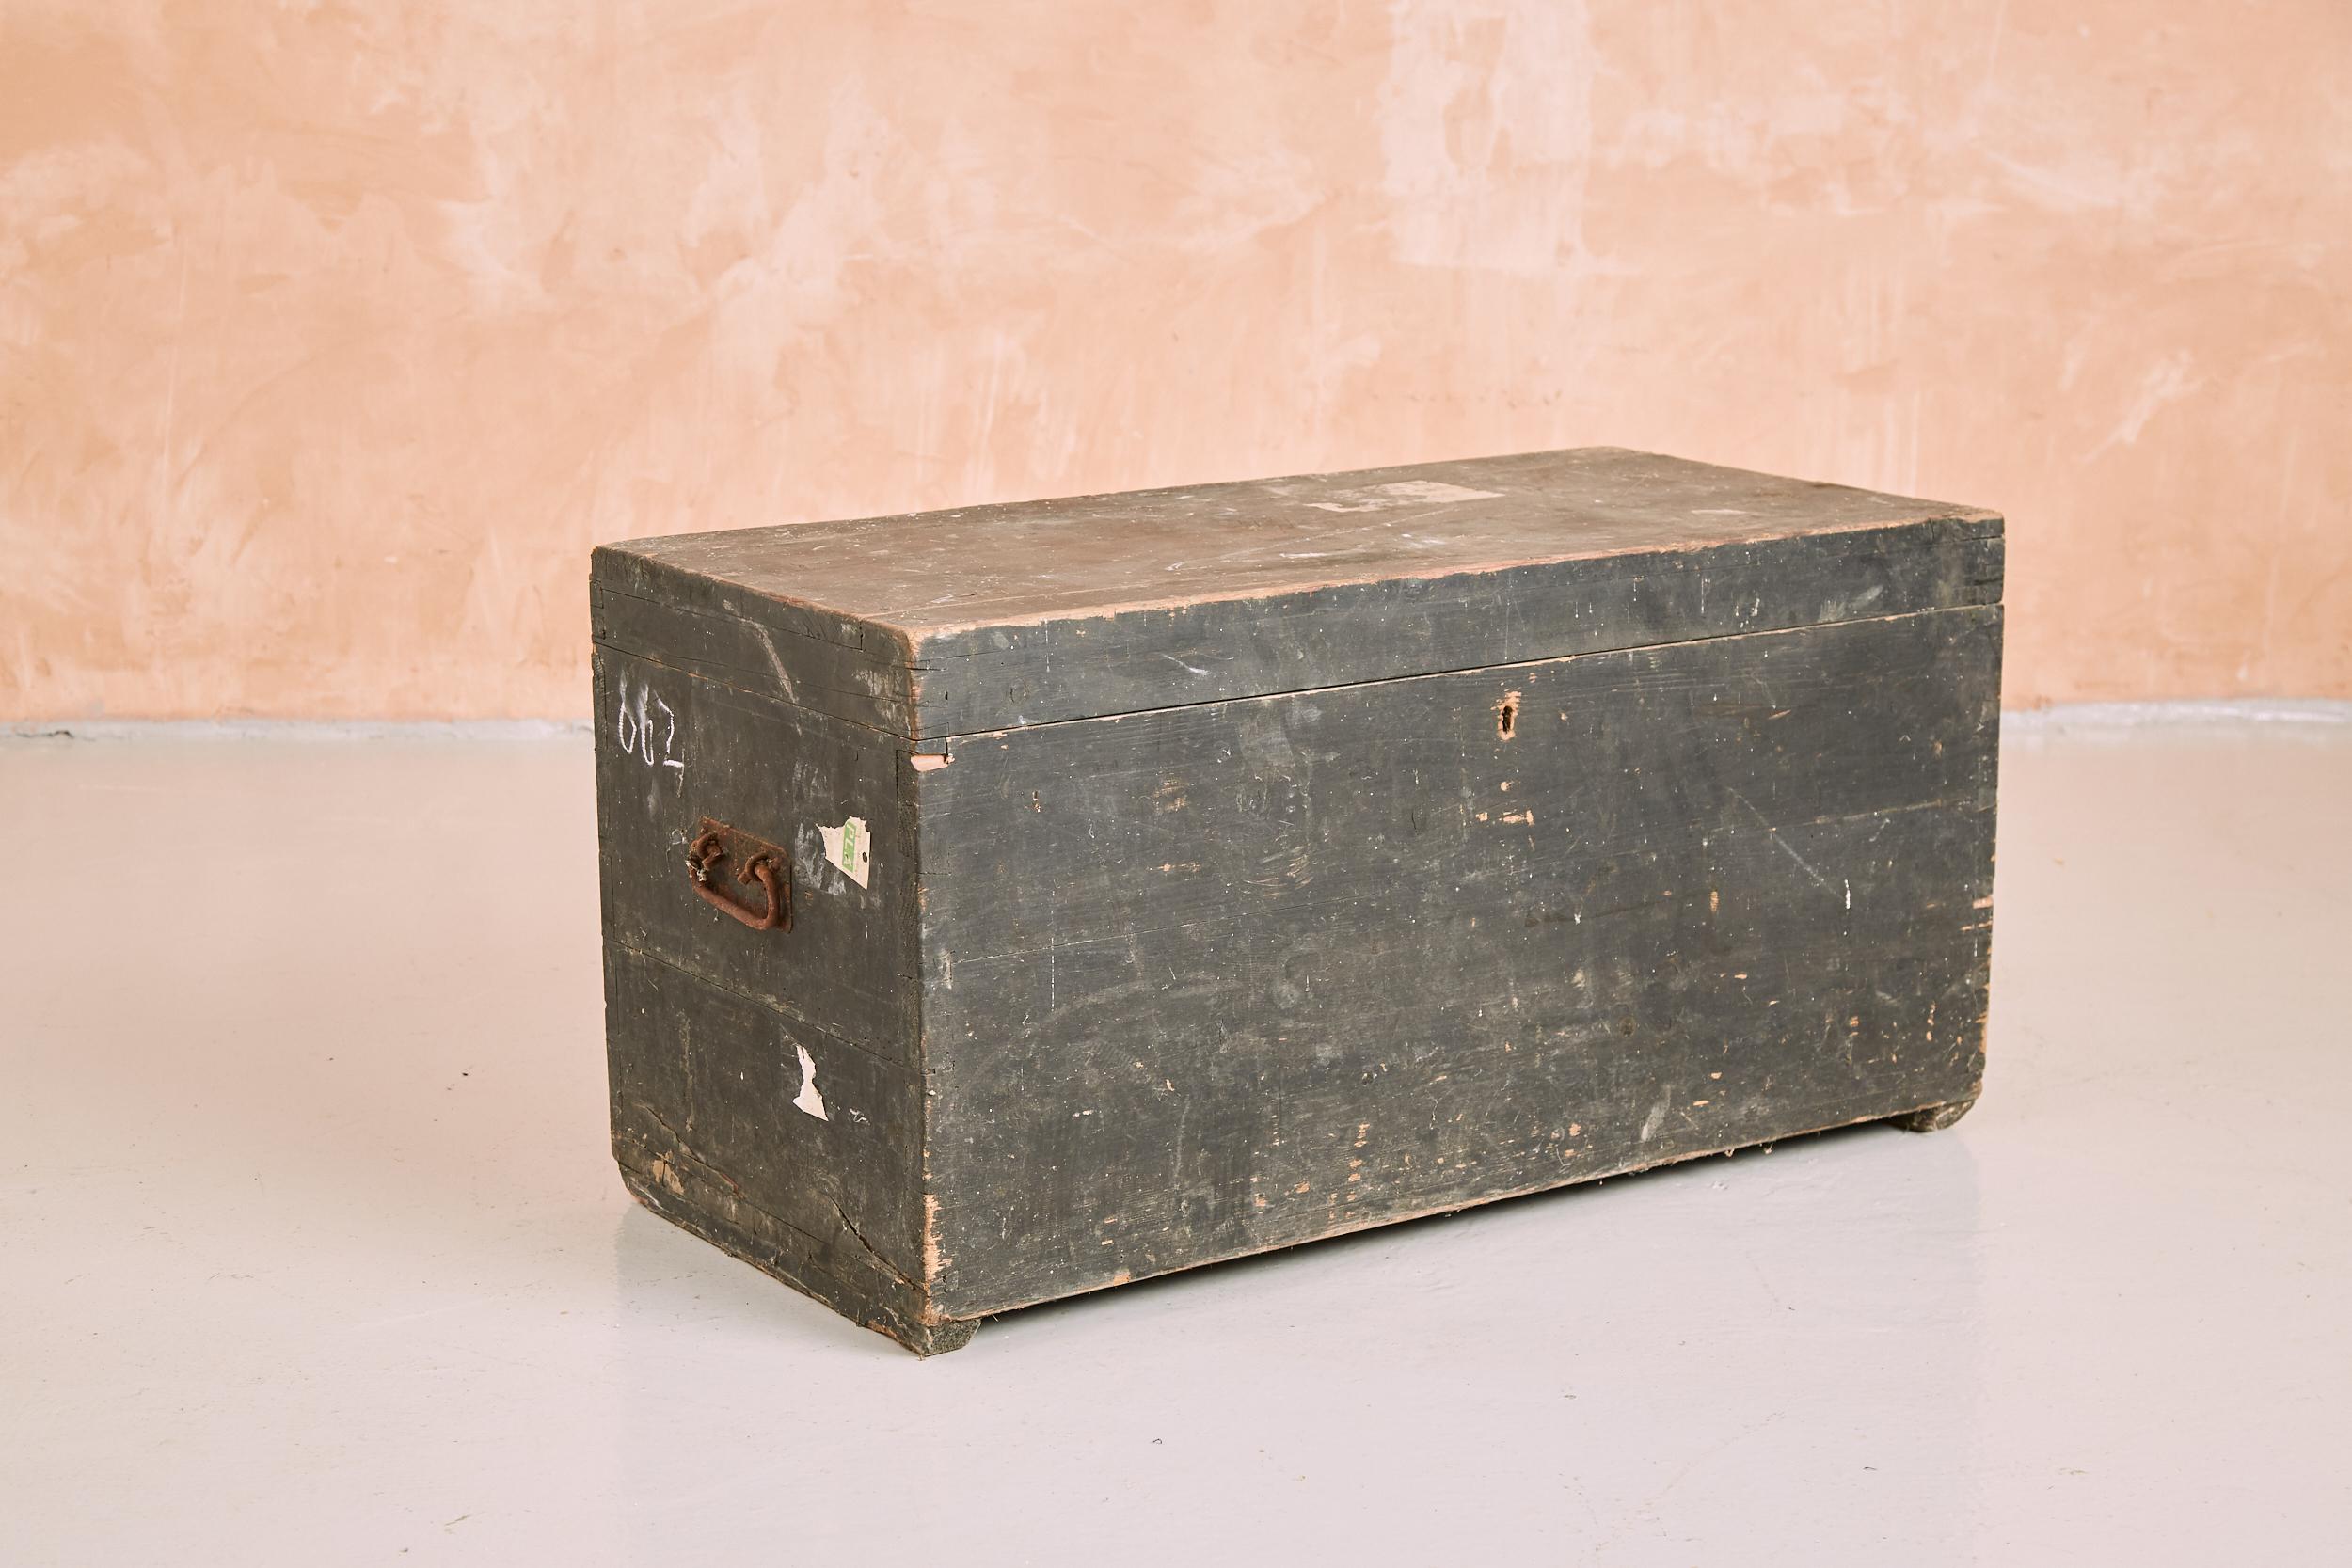 This is an antique joiner's chest. An English, pine craftsman's trunk, dating to the early Victorian period, circa 1850.

A stout chest with Victorian appeal - ideal for use as coffee table and displays a desirable aged patina